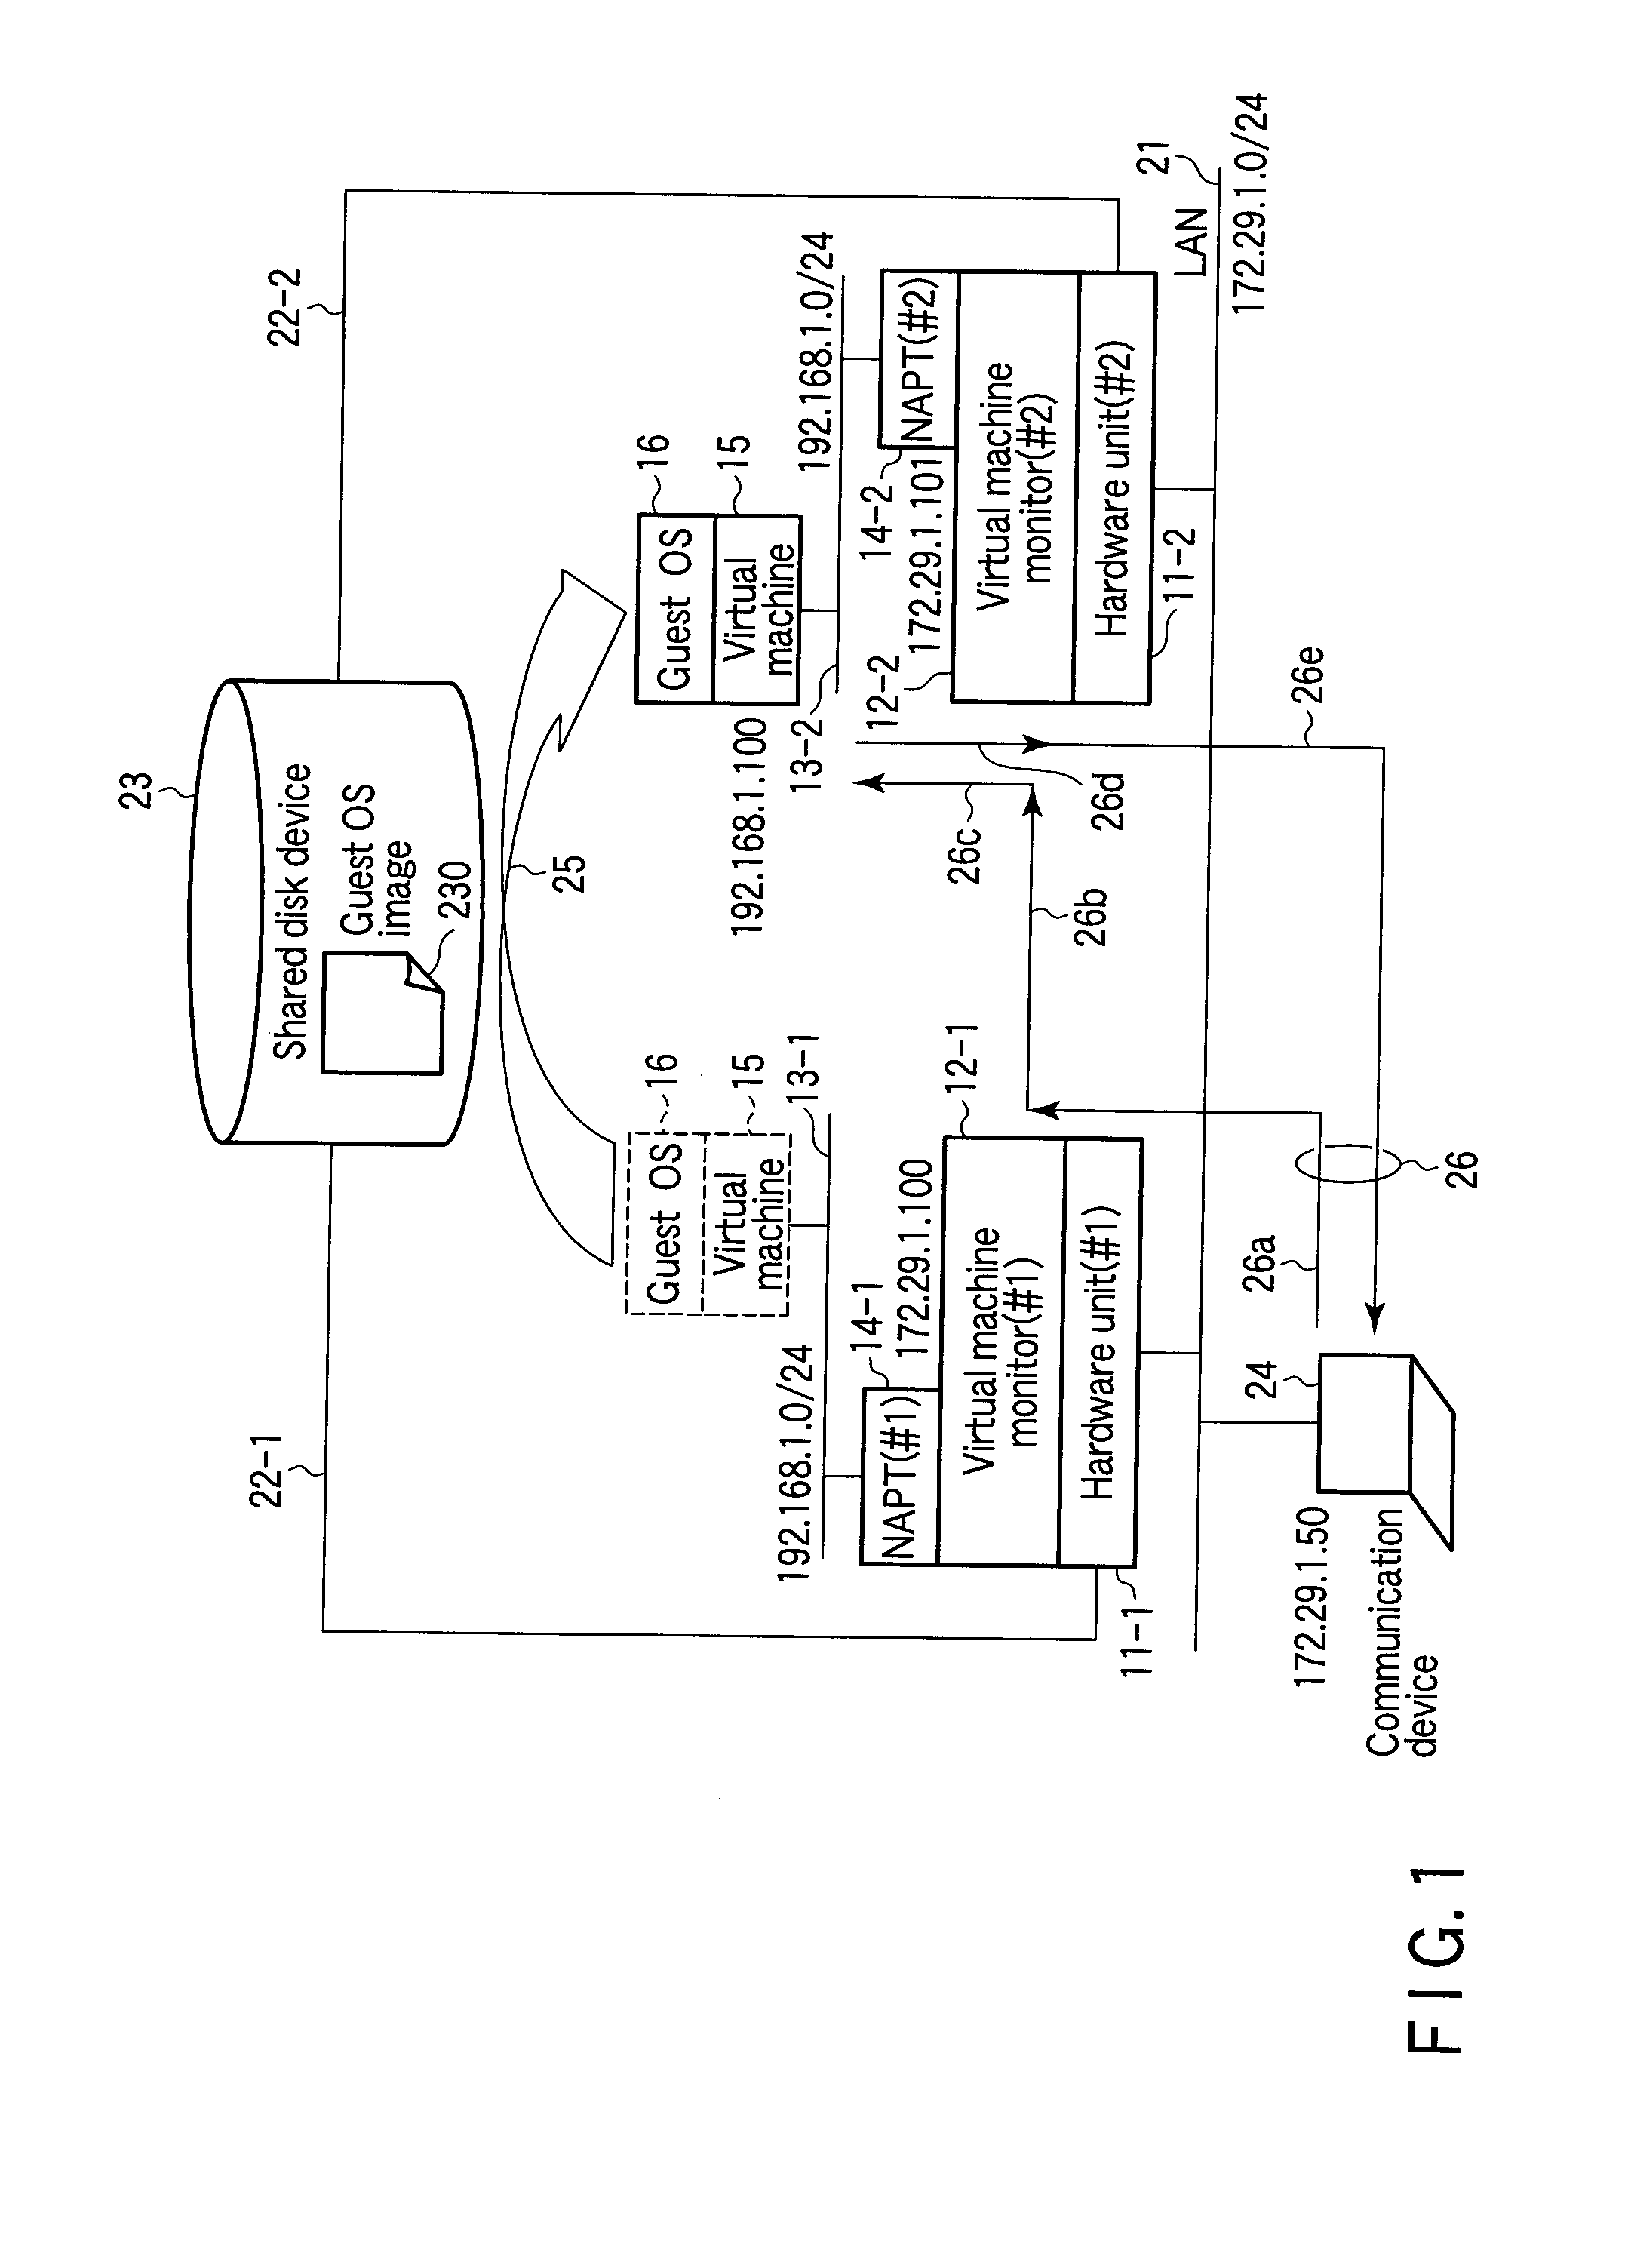 Method of controlling the communication between a machine using private addresses and a communication device connected to a global network